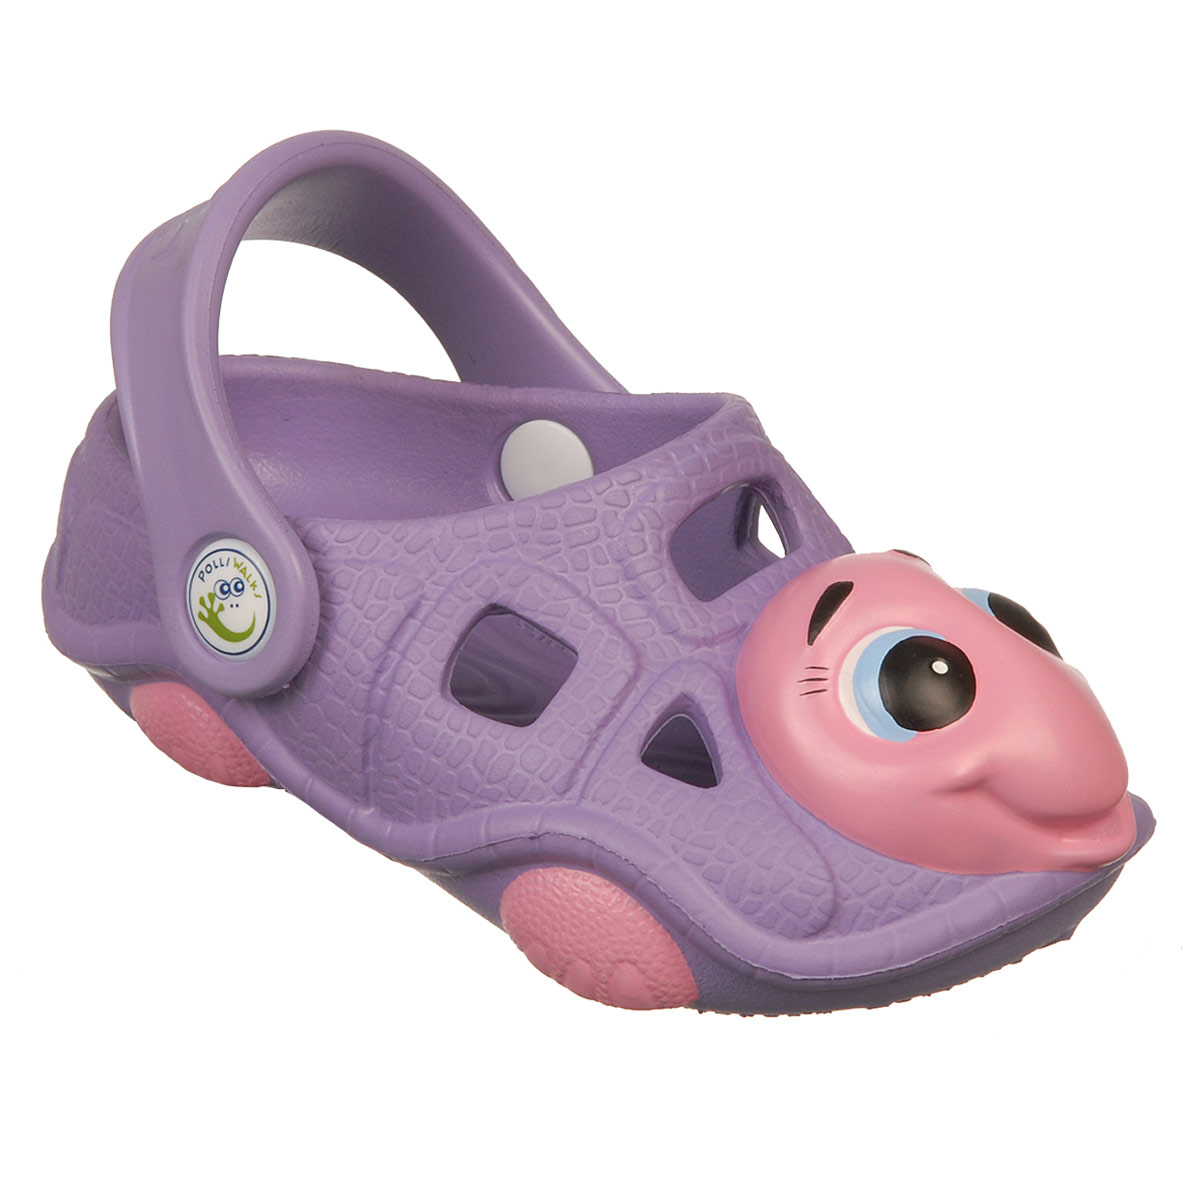 Polliwalks : Toddler shoes Tory  the Turtle  Purple # 9